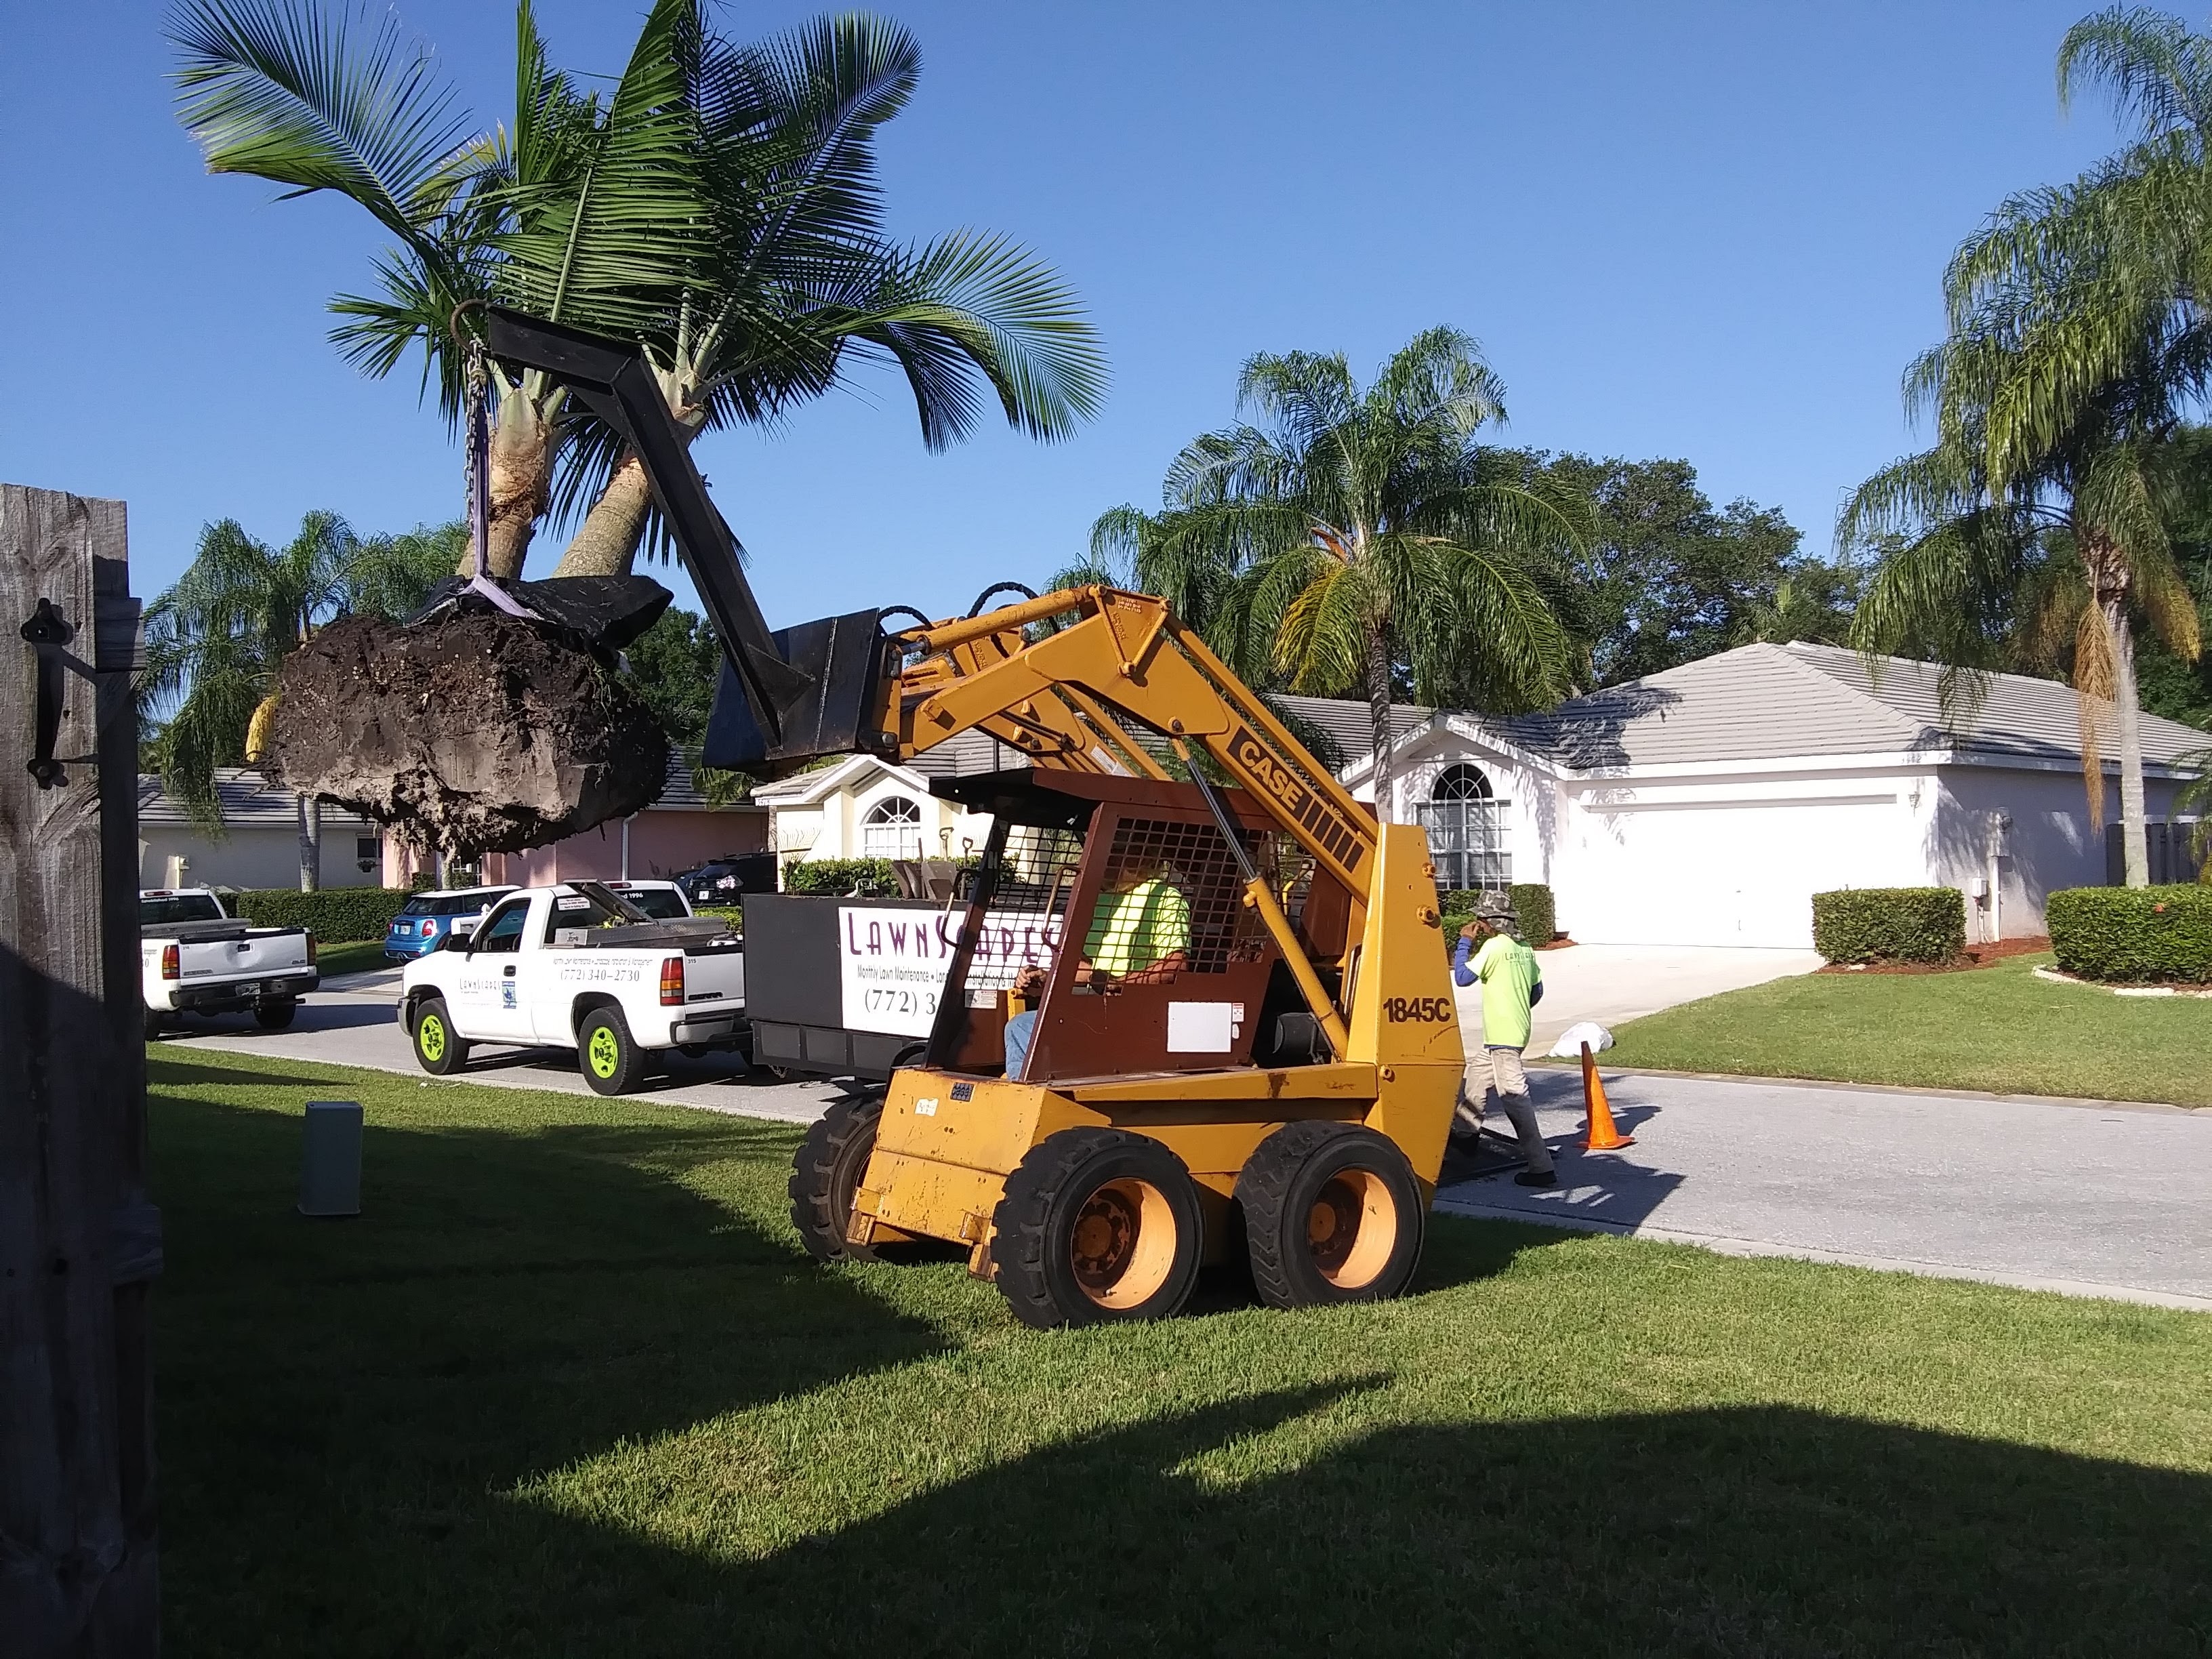 Fort removal me, affordable Lauderdale FL near tree